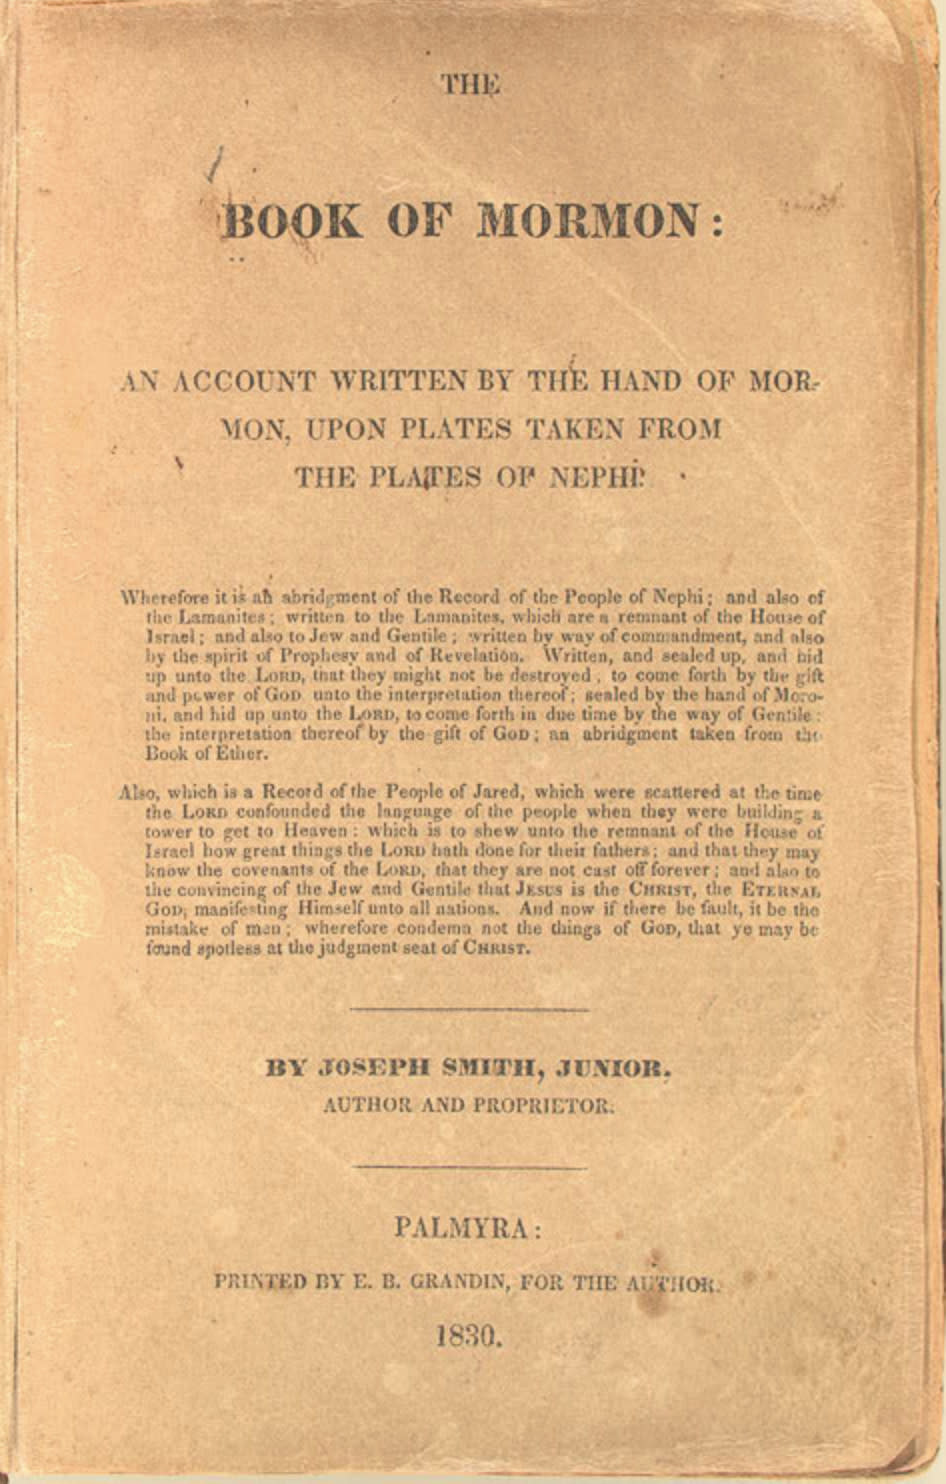 The title page is shown from a first edition copy of the Book of Mormon printed in 1830.